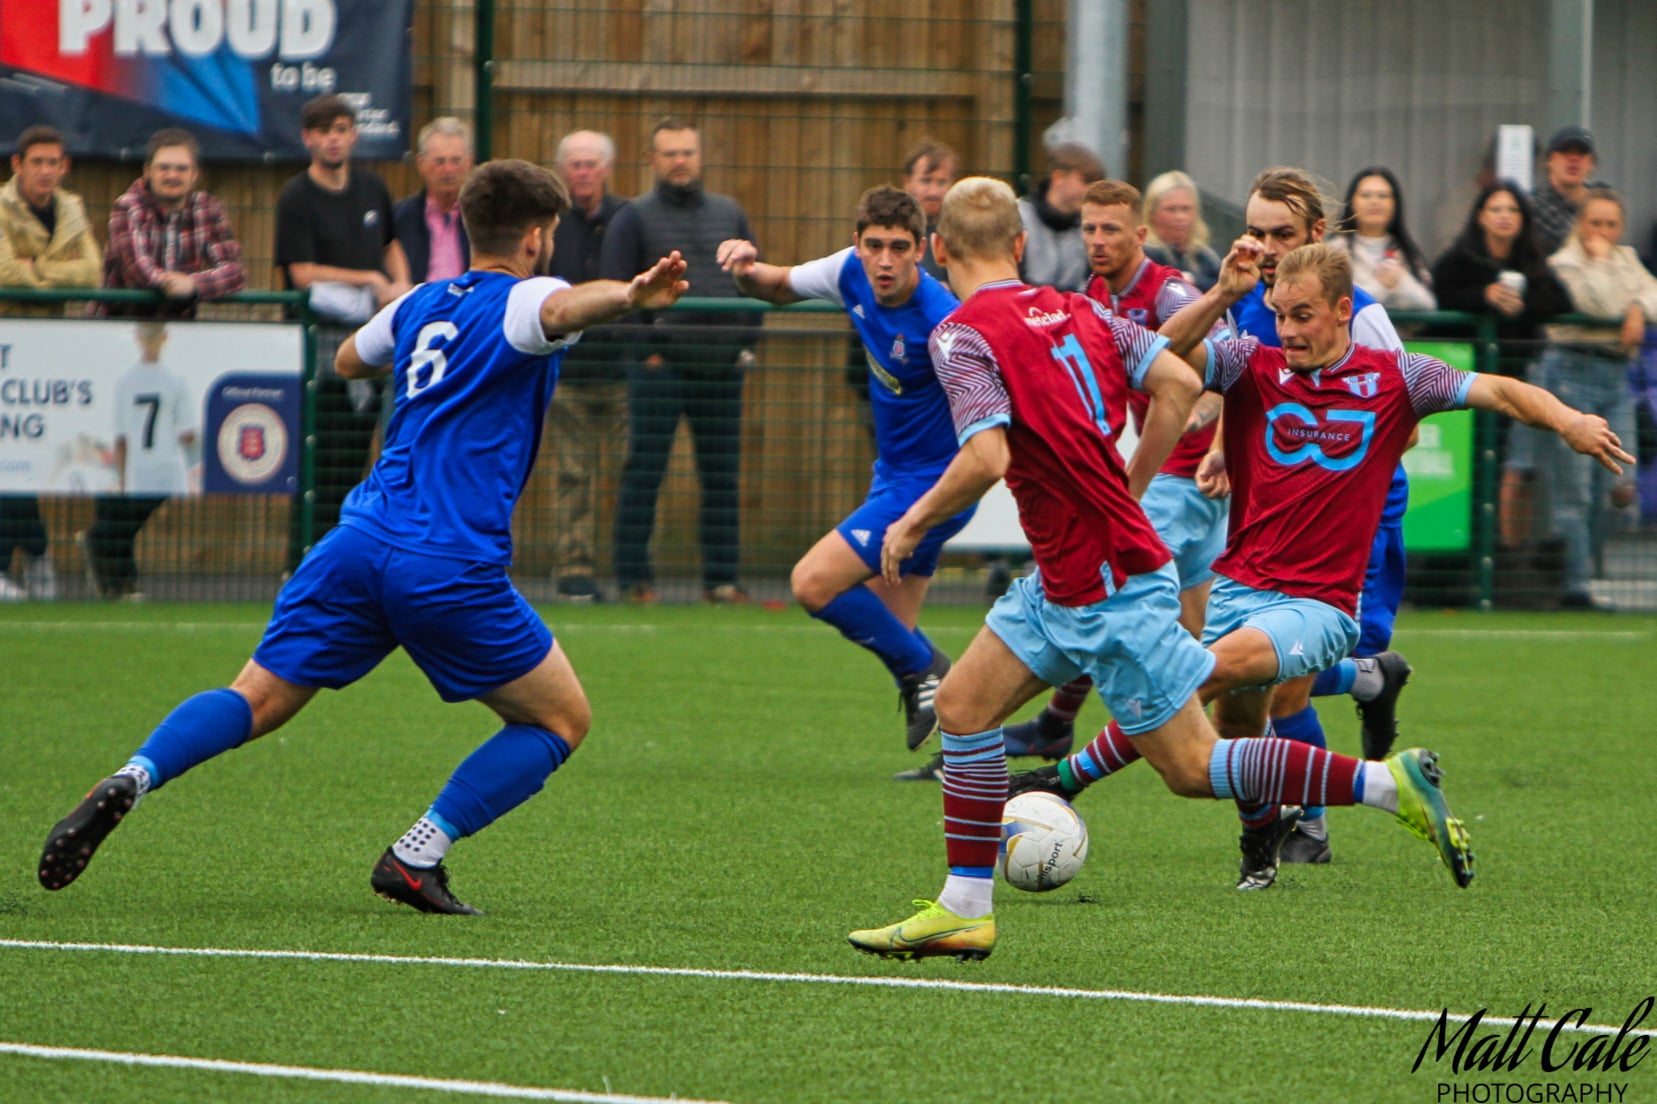 FOOTBALL | Westfields score four to go joint second ahead of a big local derby with Lads Club